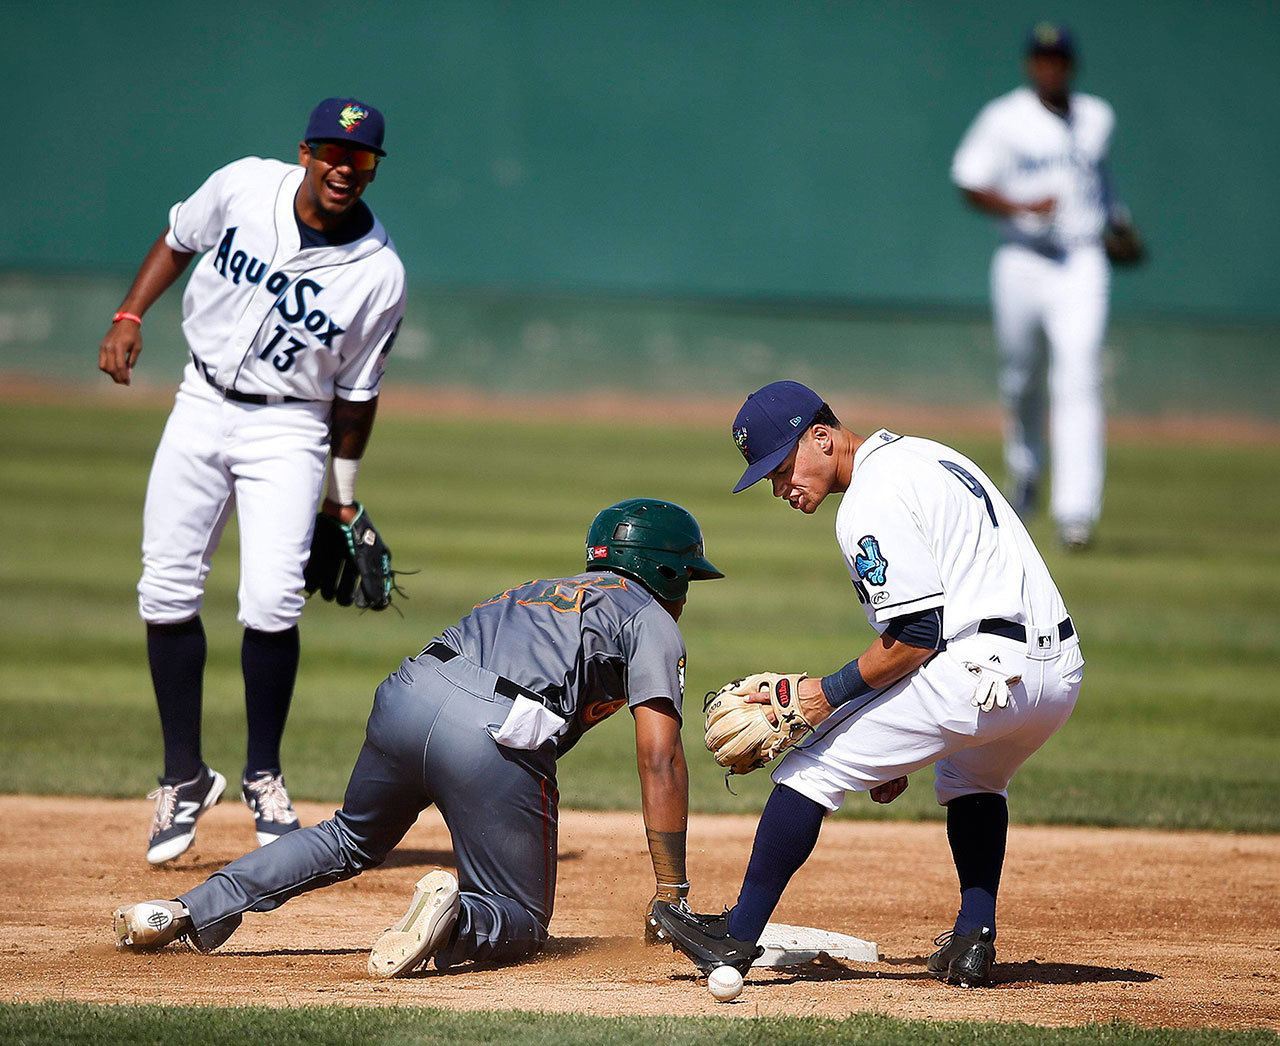 AquaSox shortstop Bryson Brigman (9) looks for the ball as Boise’s Luis Castro slides safely back into second base on a pickoff play during Sunday’s game at Everett Memorial Stadium. (Ian Terry / The Herald)